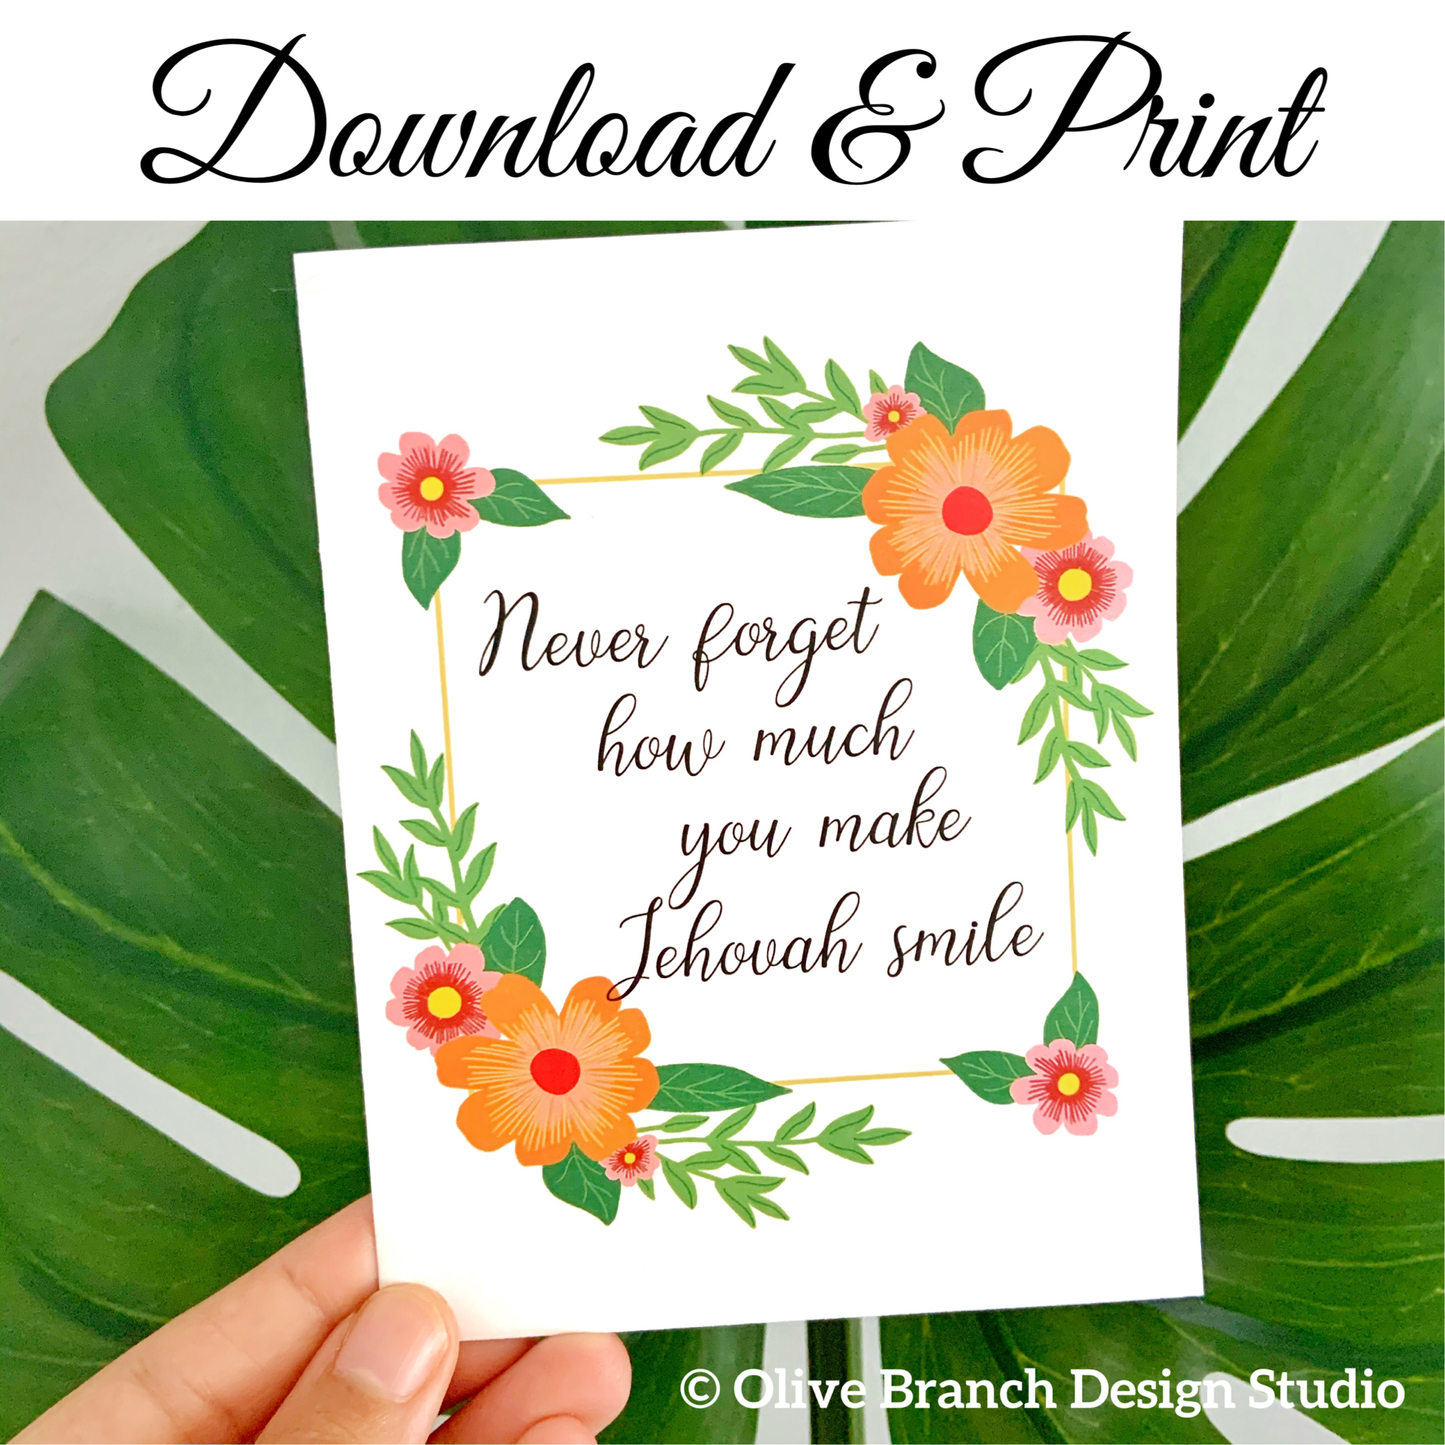 Never Forget How Much You Make Jehovah Smile Card - Download & Print